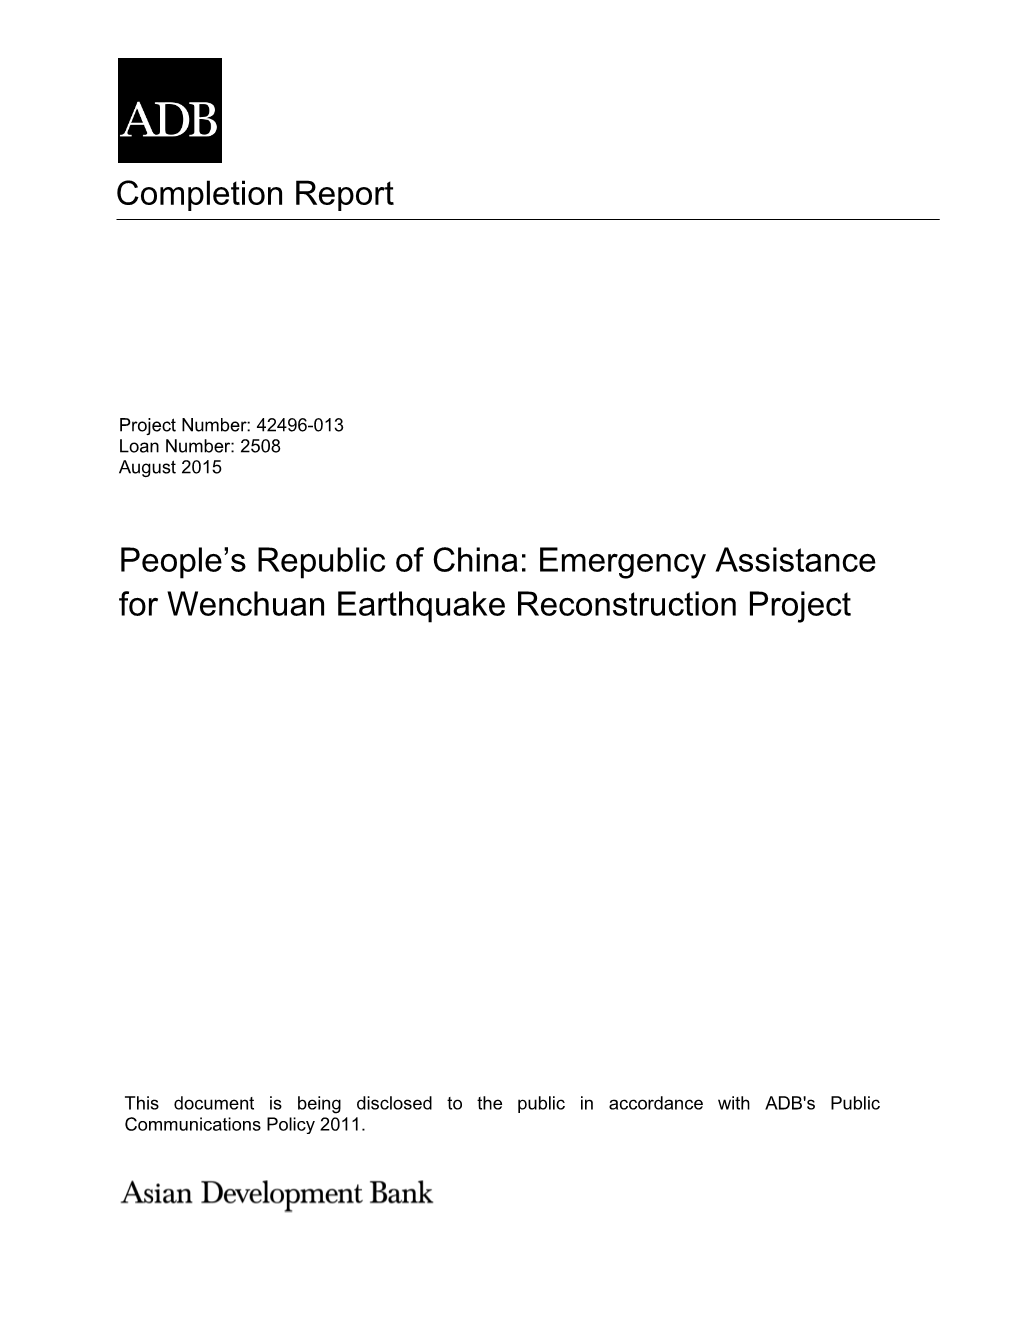 Emergency Assistance for Wenchuan Earthquake Reconstruction Project